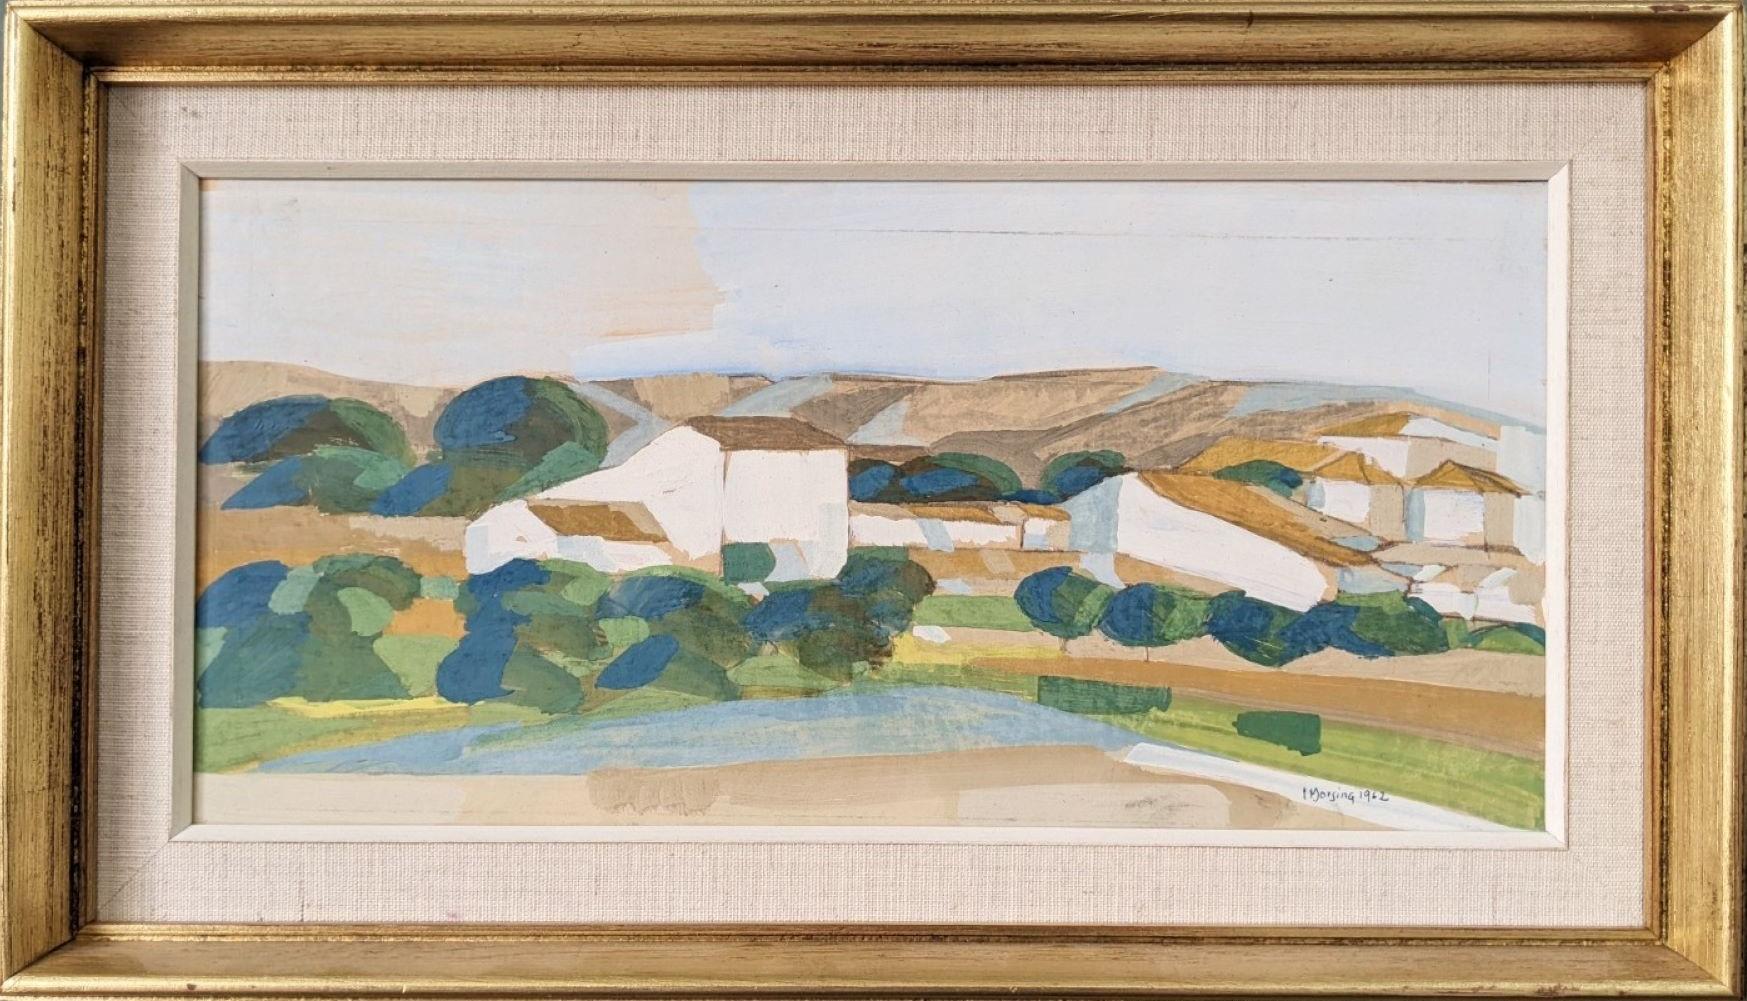 SPANISH LANDSCAPE
Size: 25 x 42.5 cm (including frame)
Oil on panel

A gentle and charming city landscape composition dated 1962, and executed in oil by the well-established Swedish artist Ivar Morsing (1919-2009) whose works have been exhibited in